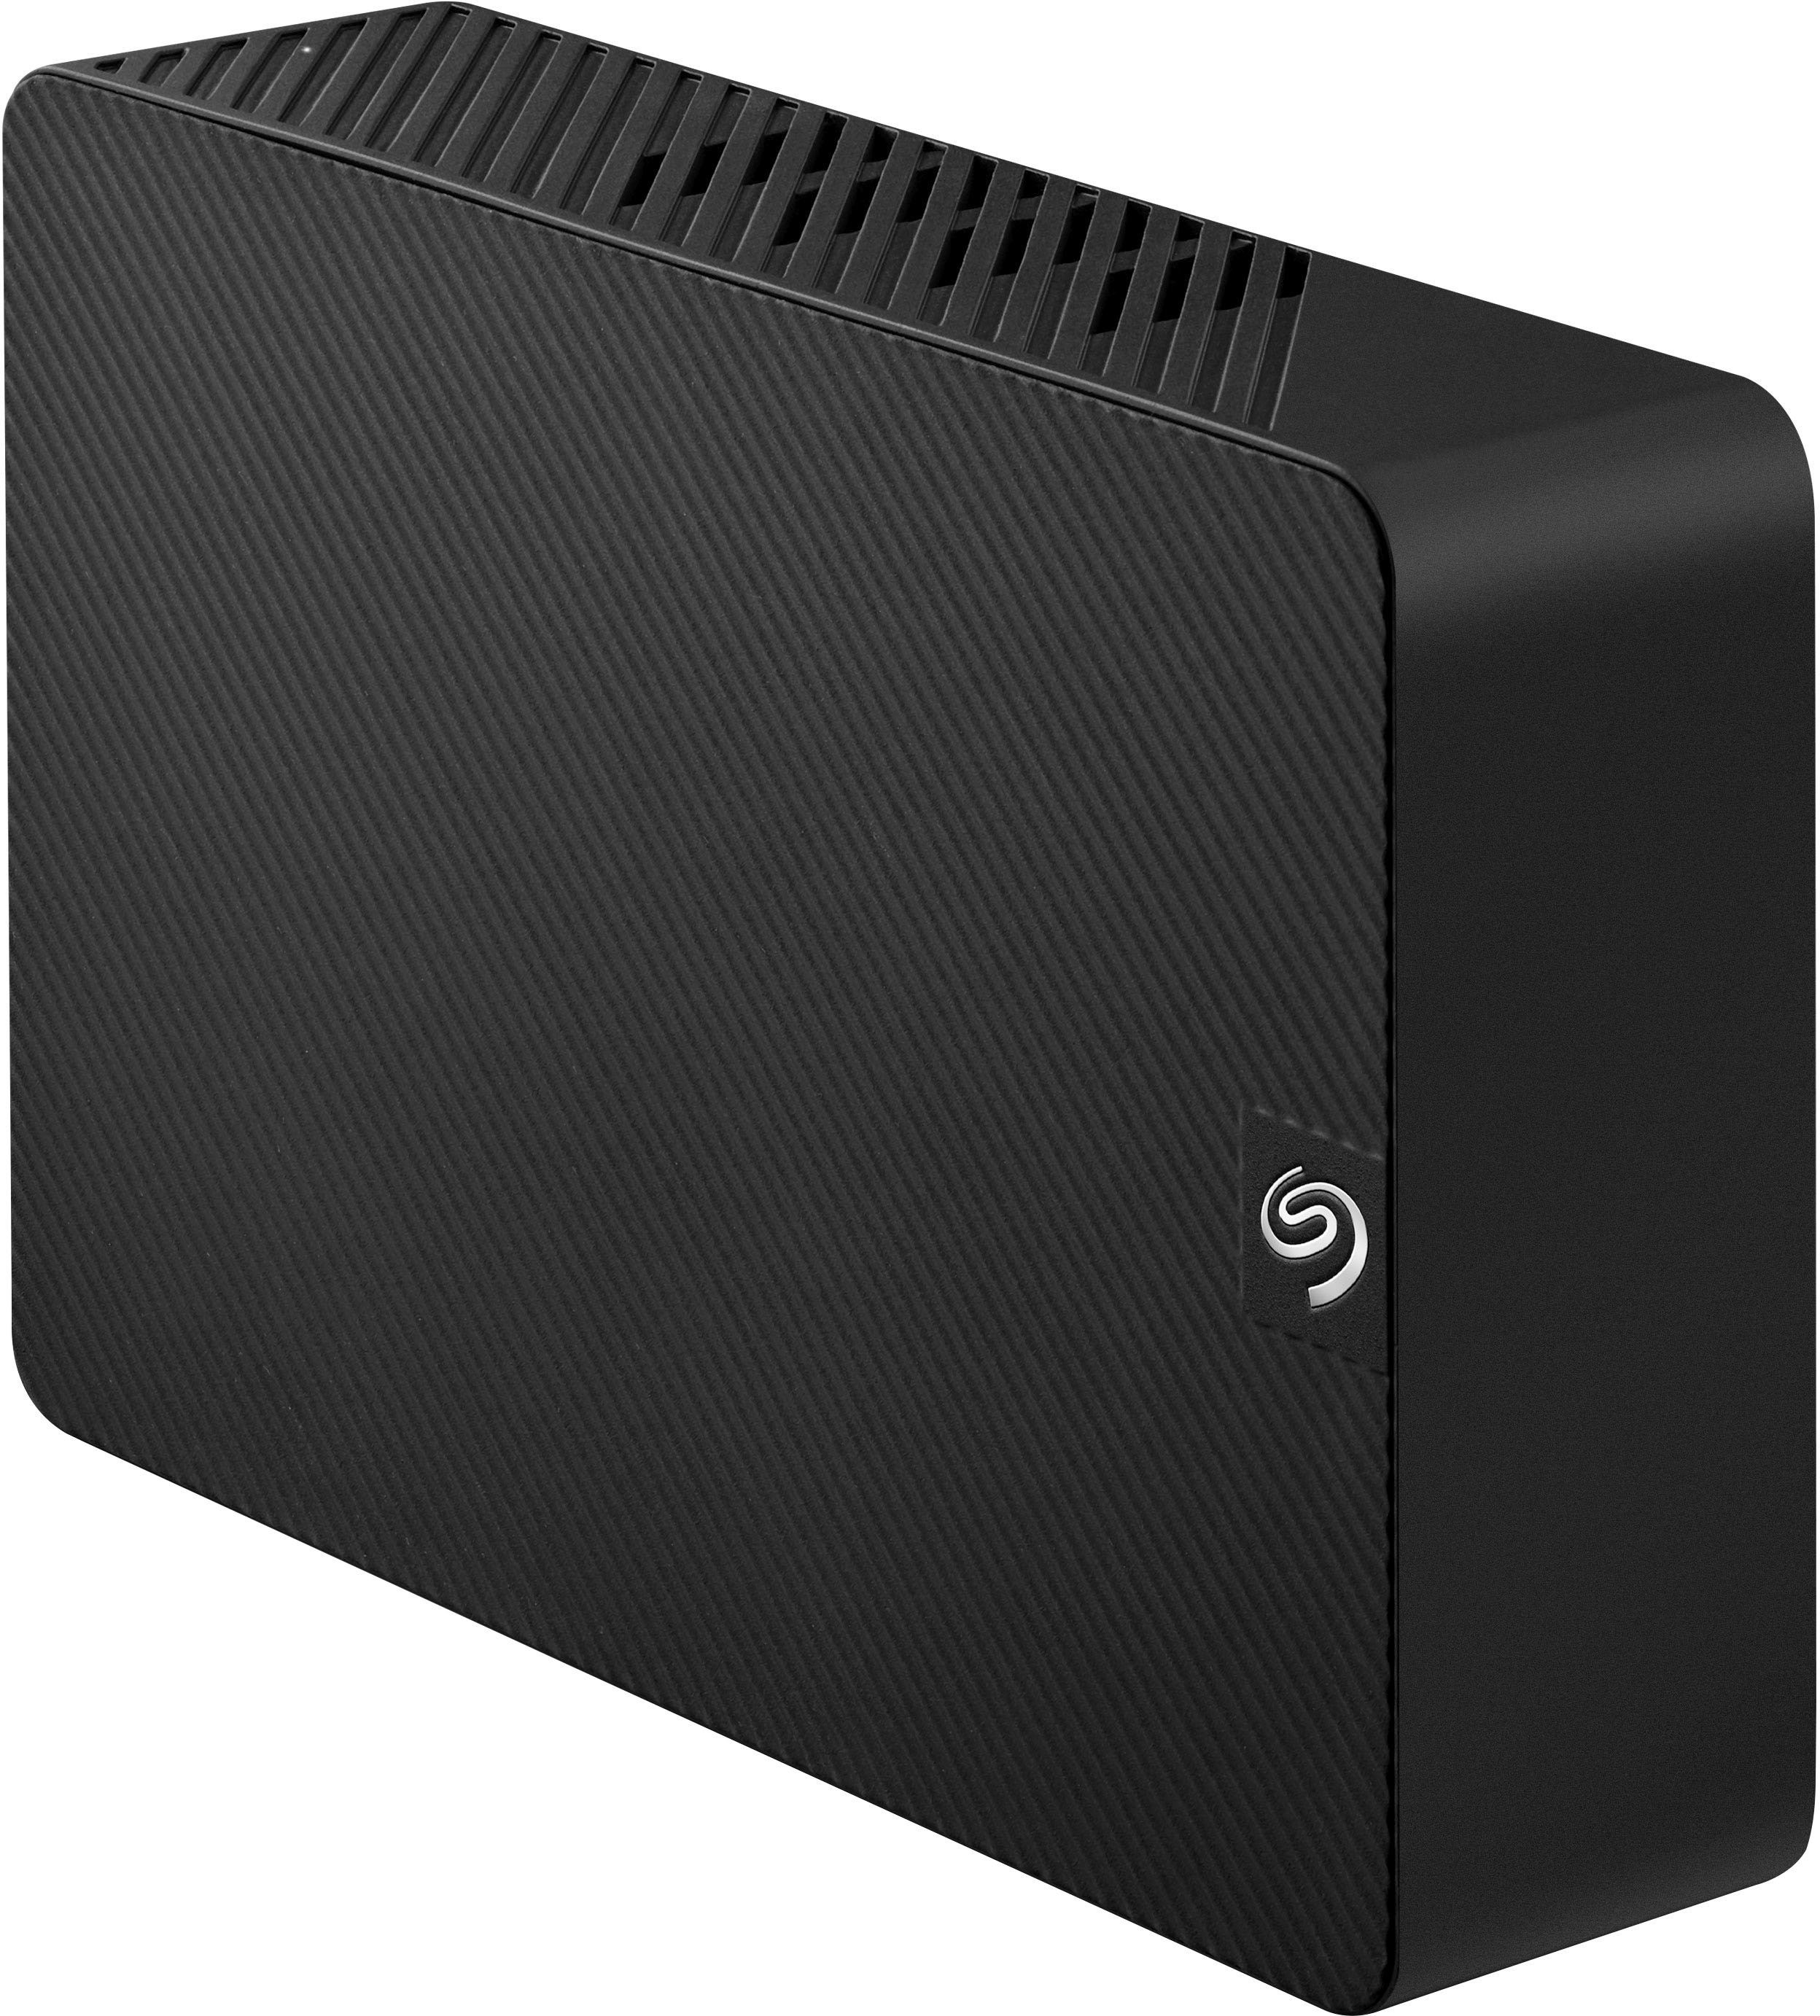 Seagate - Expansion 16TB External USB 3.0 Hard Drive with Rescue Data Recovery Services - Black